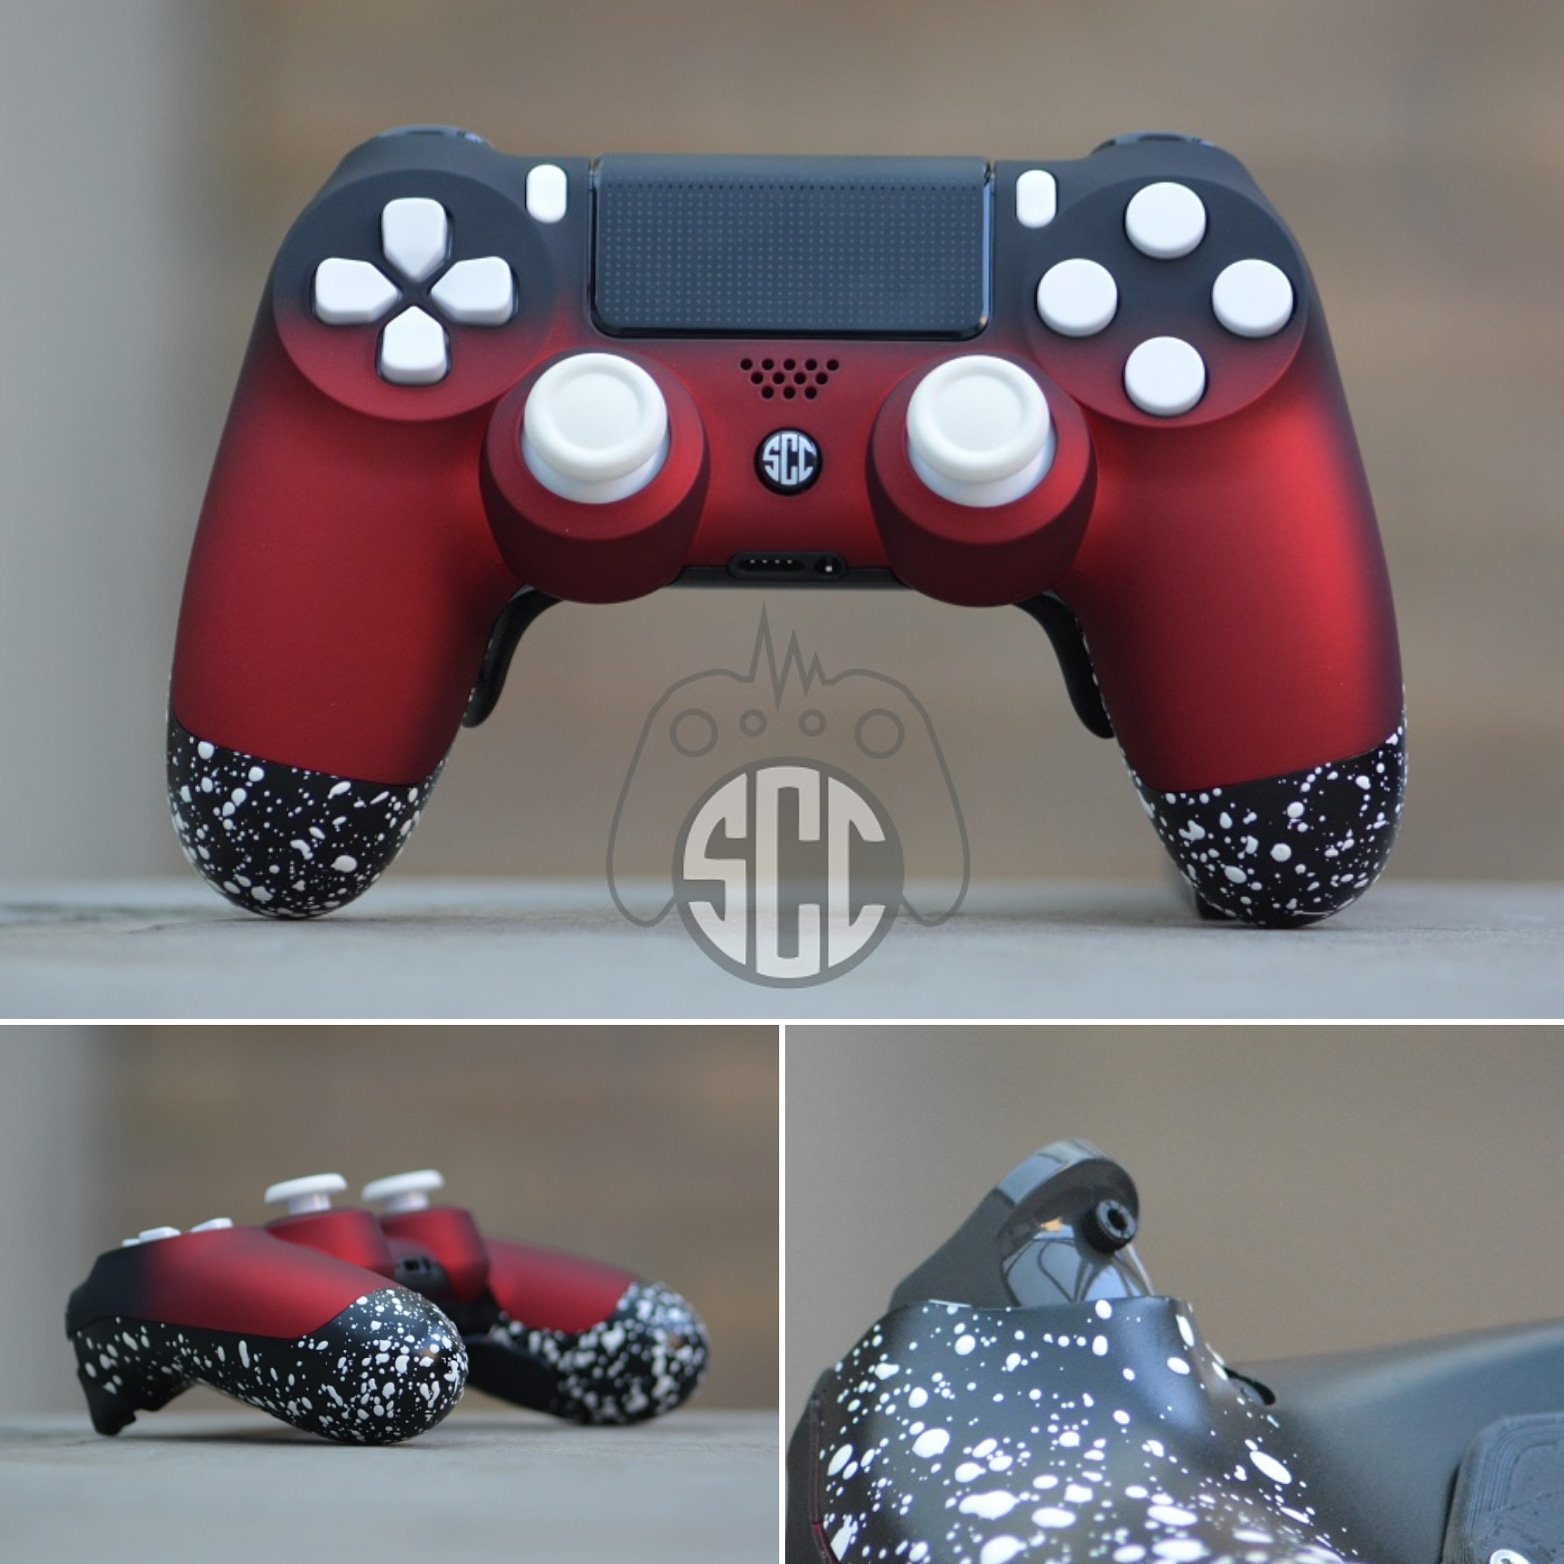 ShockwaveKnives on Twitter: "Soft #PS4 #controller met witte witte knoppen, grip, triggerstops en Shock paddles! Soft Touch # PS4controller with white sticks, white buttons, grip and Shock paddles! https://t.co/Ckvwgg1n5o" / Twitter